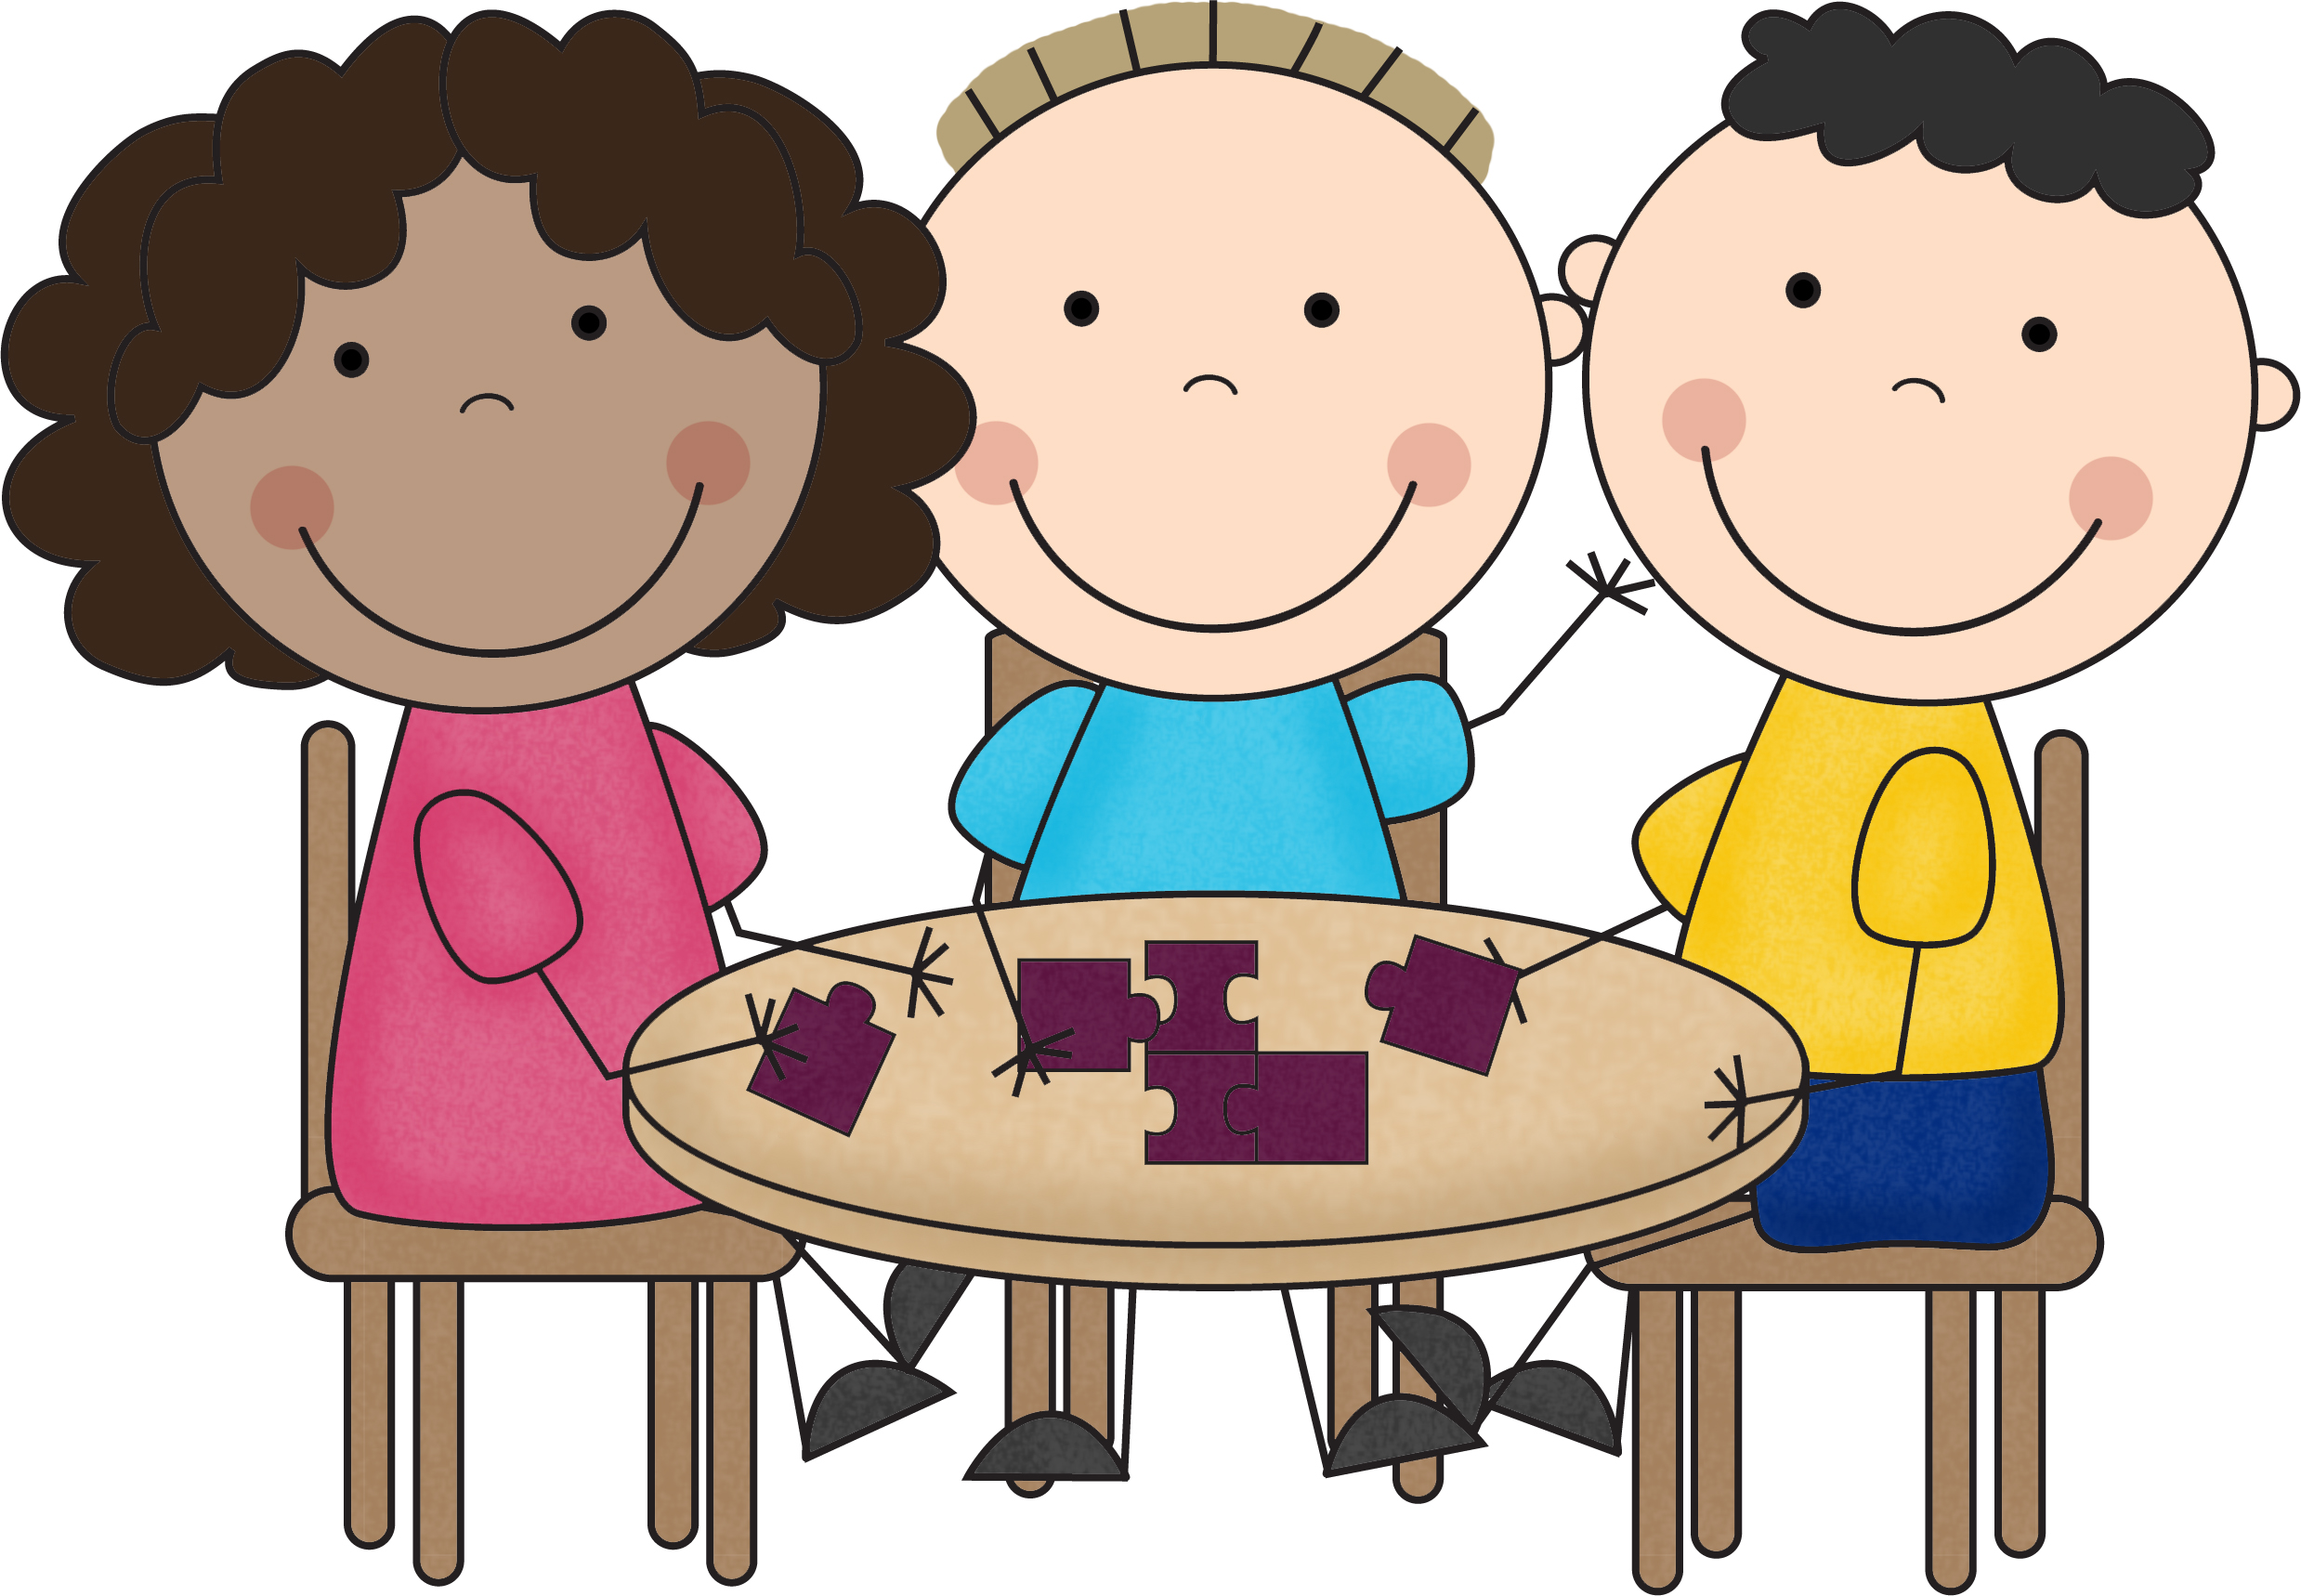 group work clipart 6